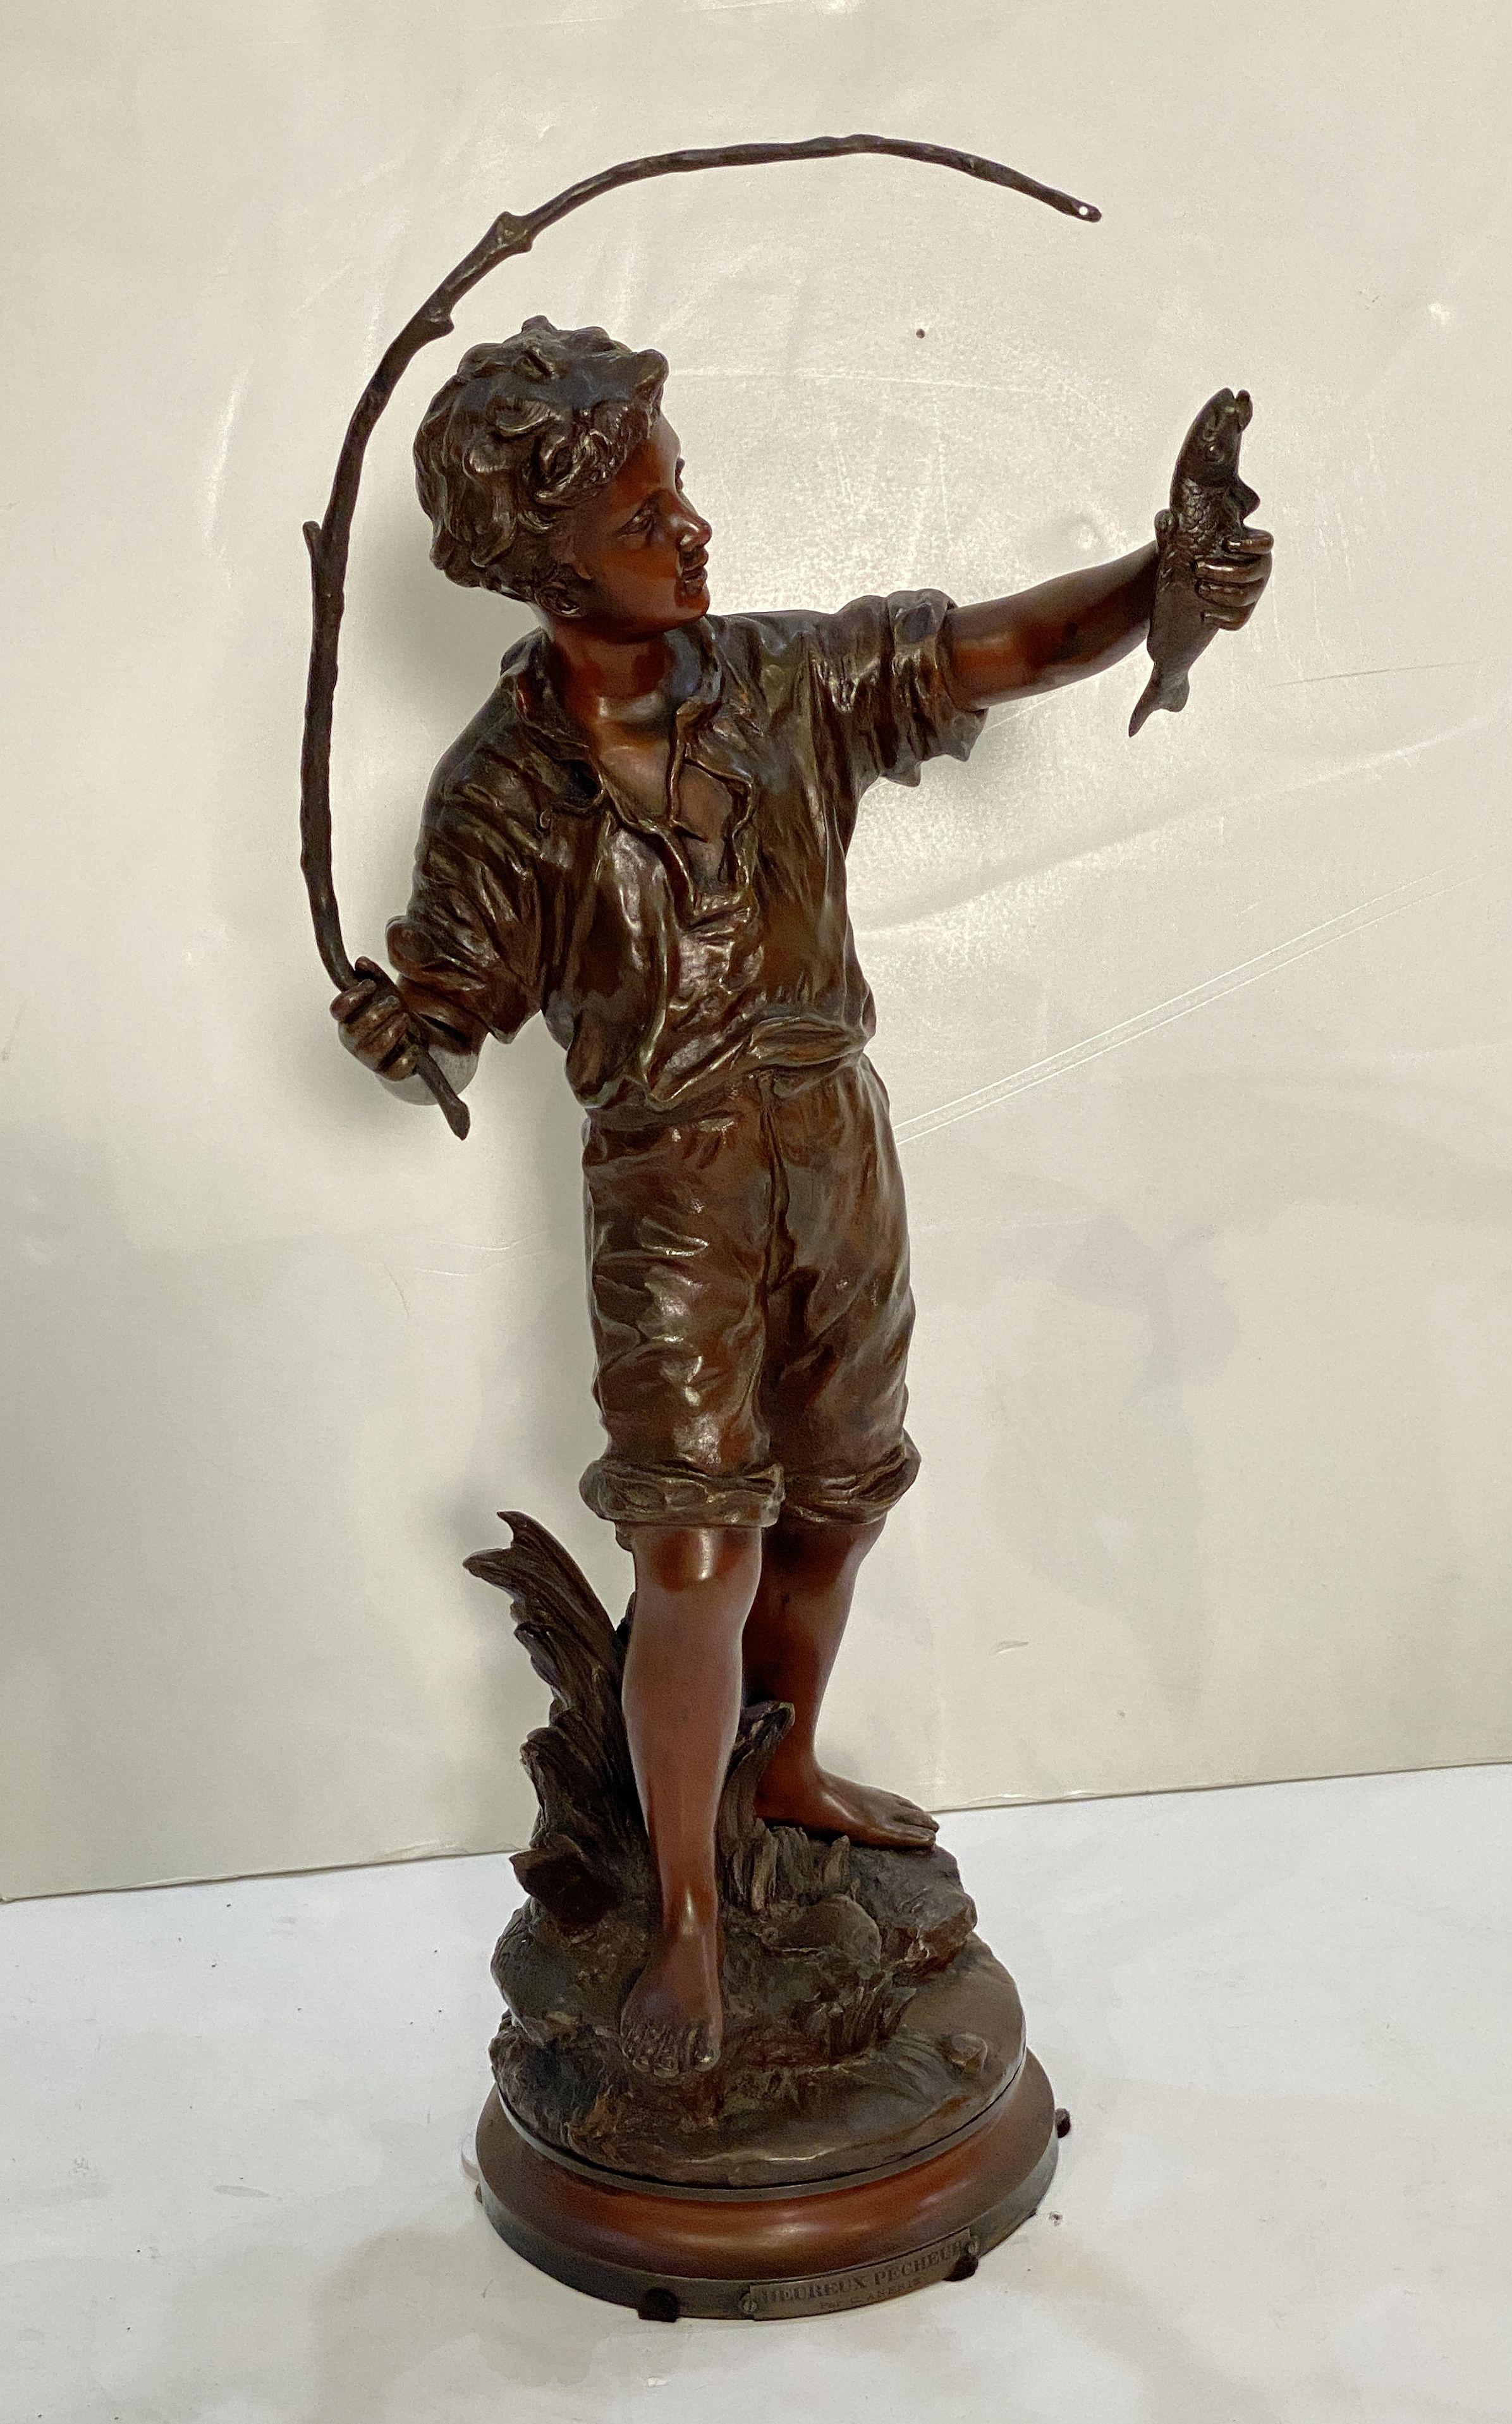 Metal Heureux Pêcheur or Happy Fisherboy Bronze Sculptural Figure by Charles Anfrie 